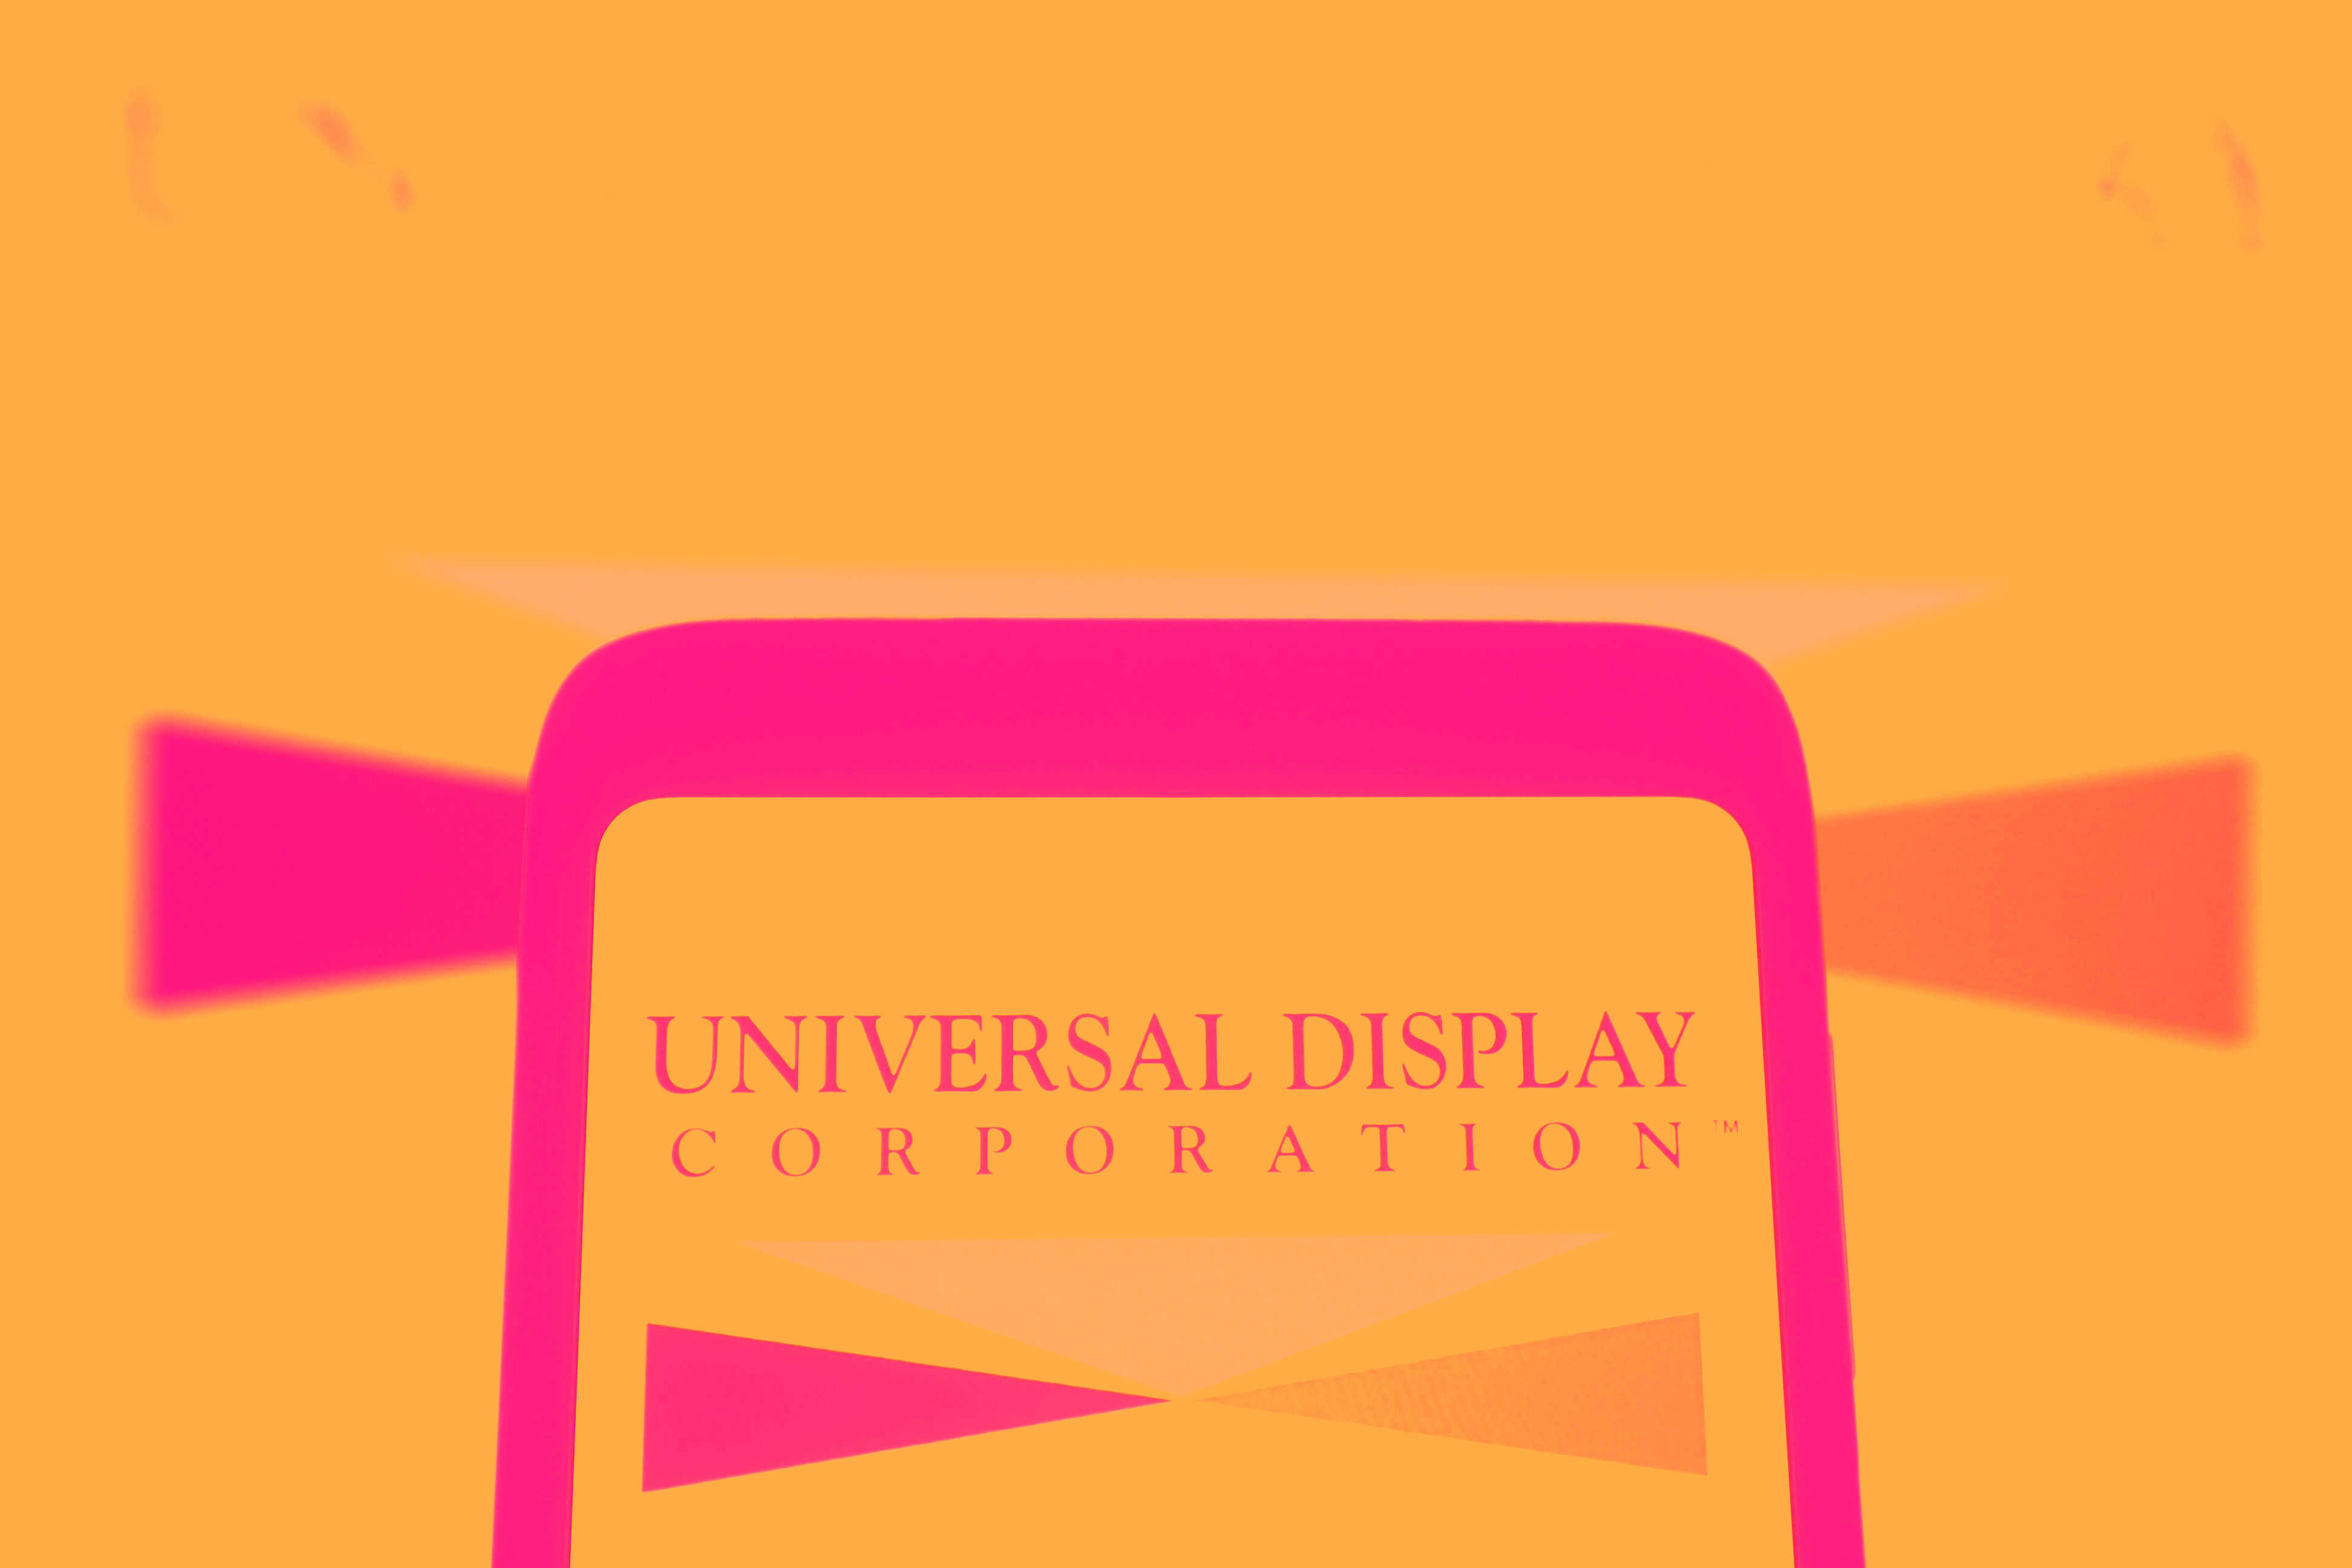 Universal display corporation cover image 3c02a069c035